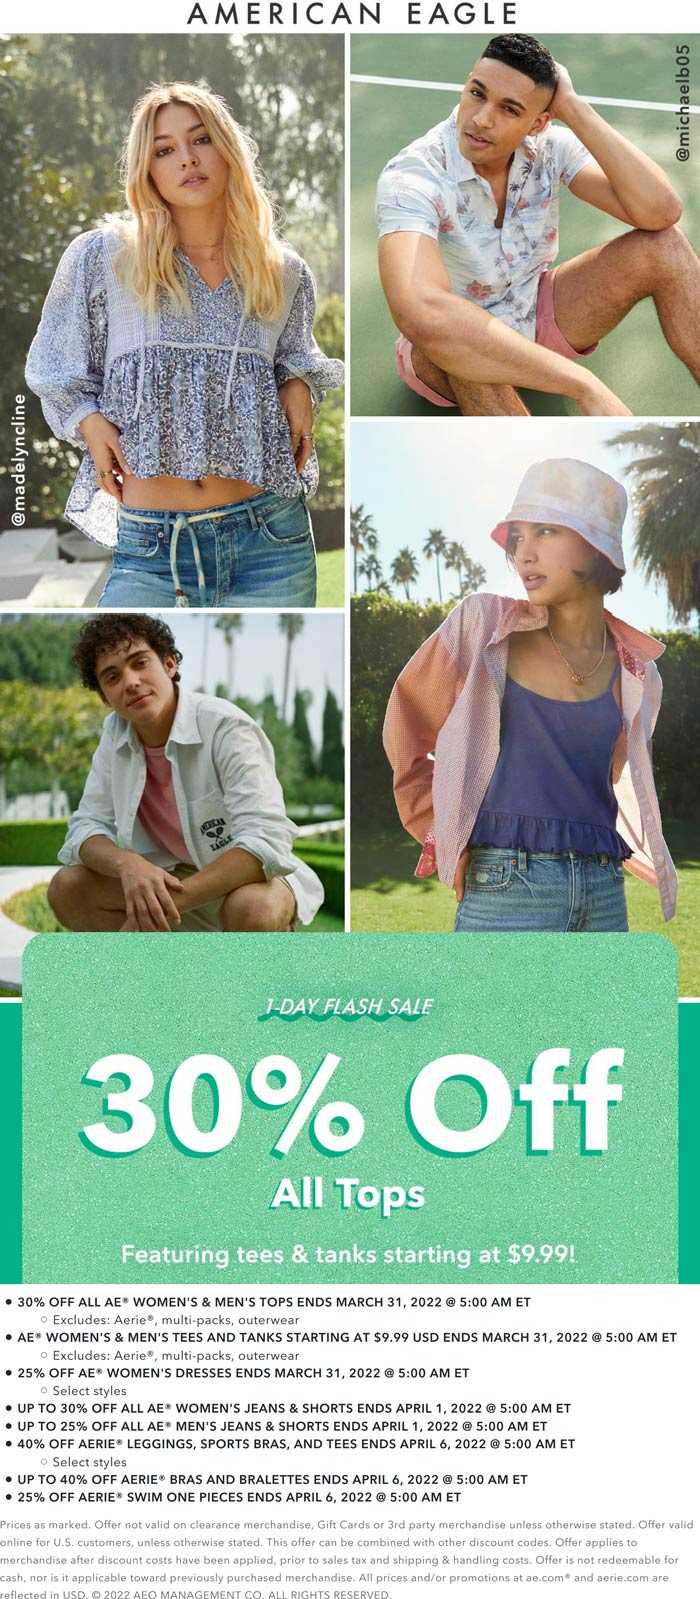 American Eagle stores Coupon  30% off all tops today at American Eagle #americaneagle 